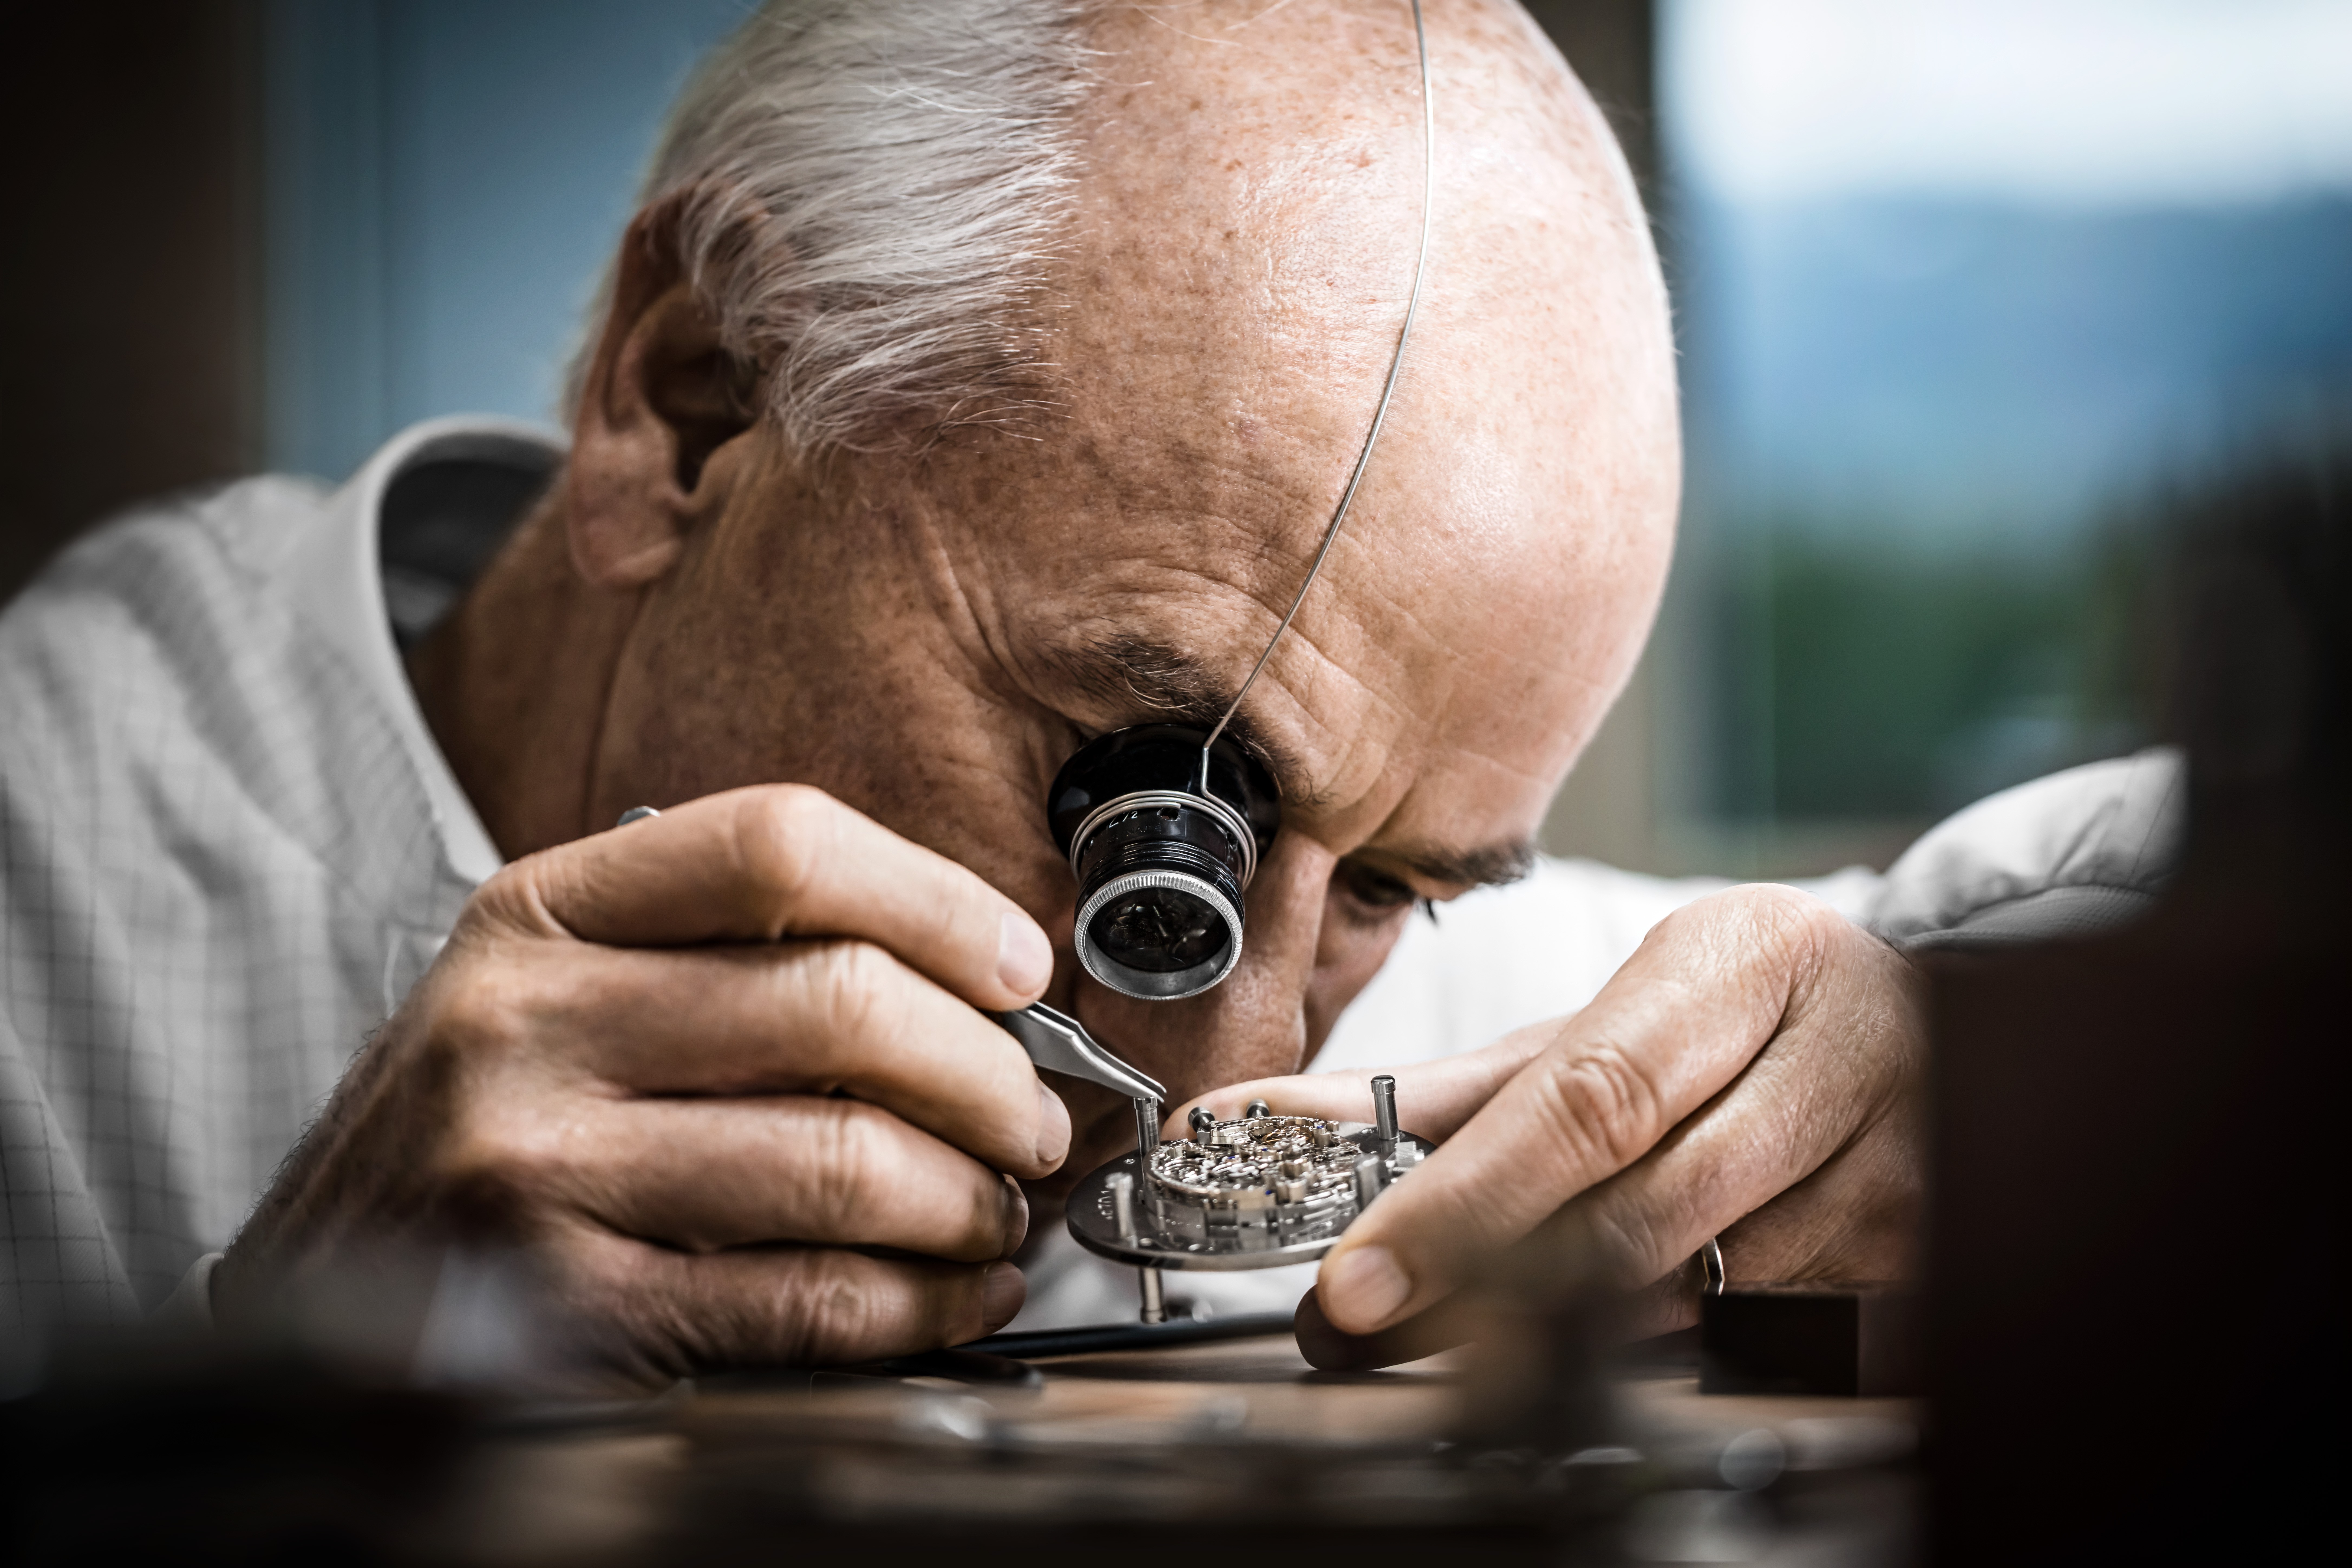 Jaeger-LeCoultre's new Care programme connects collectors with craftsmen through a digital platform.